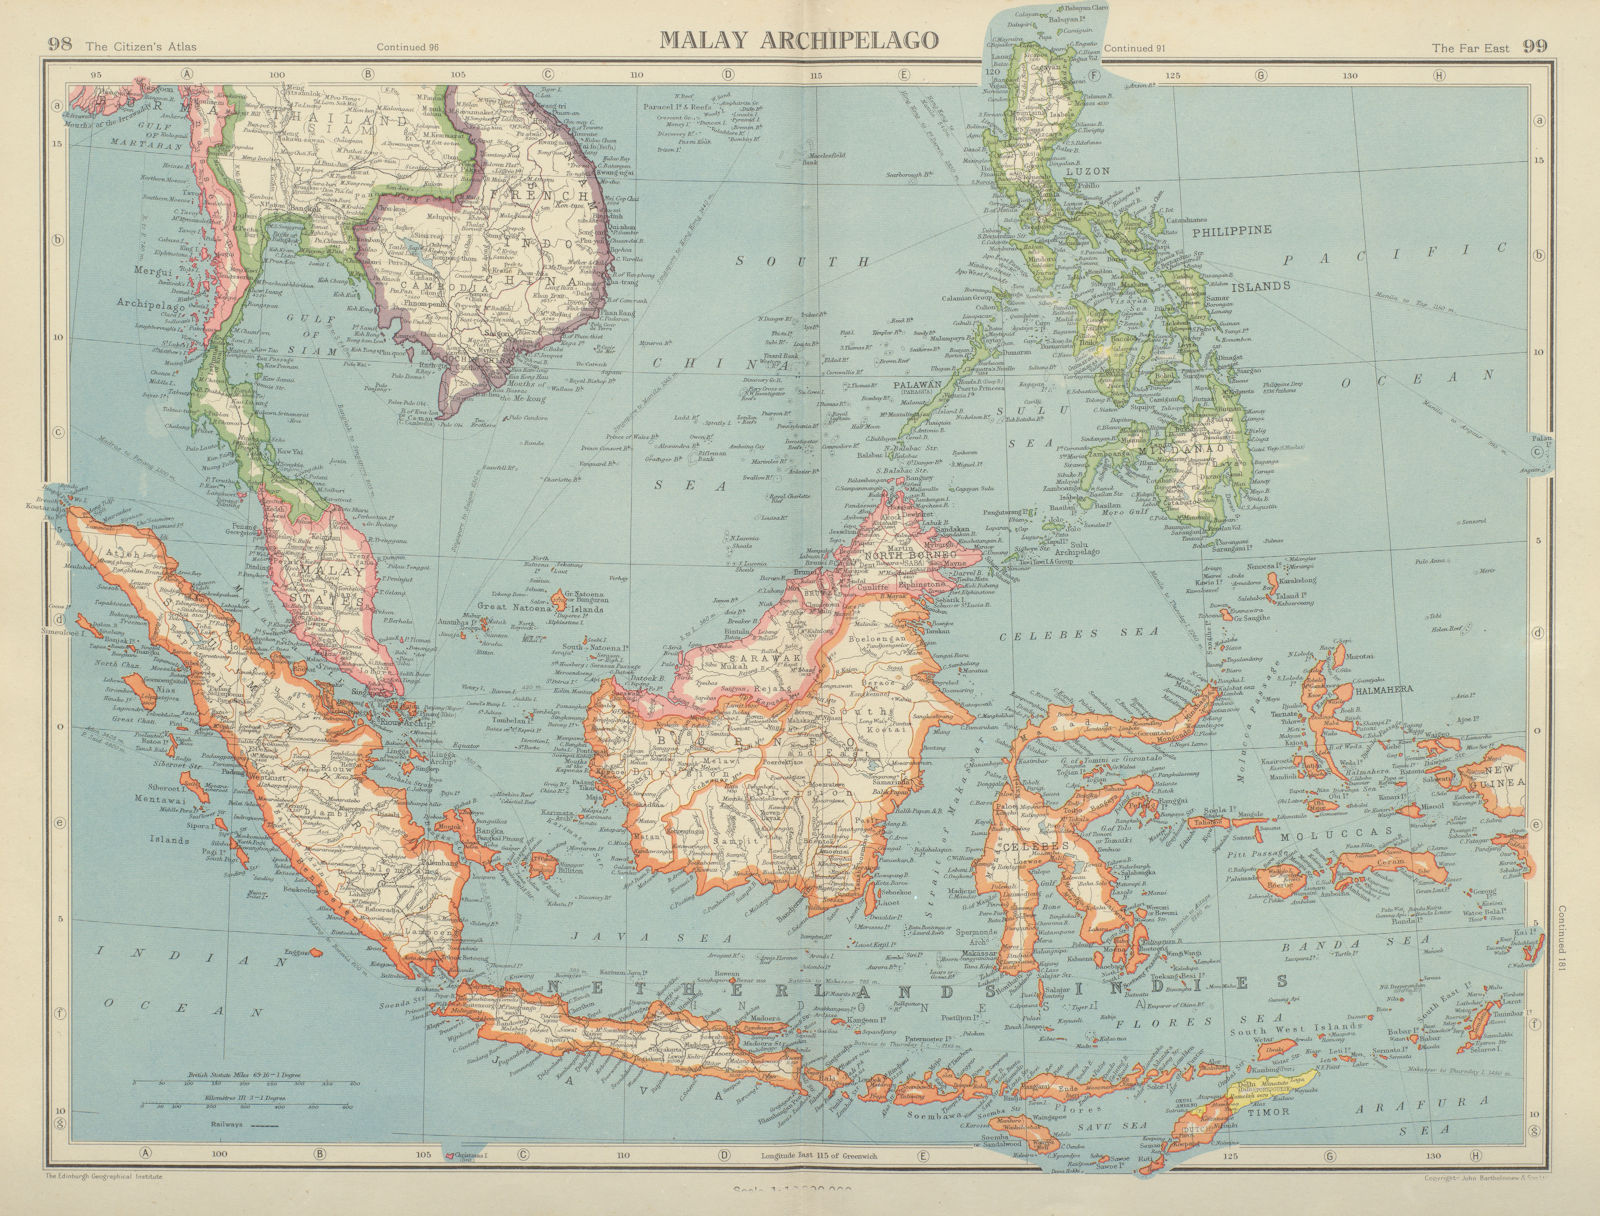 MALAY ARCHIPELAGO Dutch East Indies Indonesia Philippines Indochina 1947 map